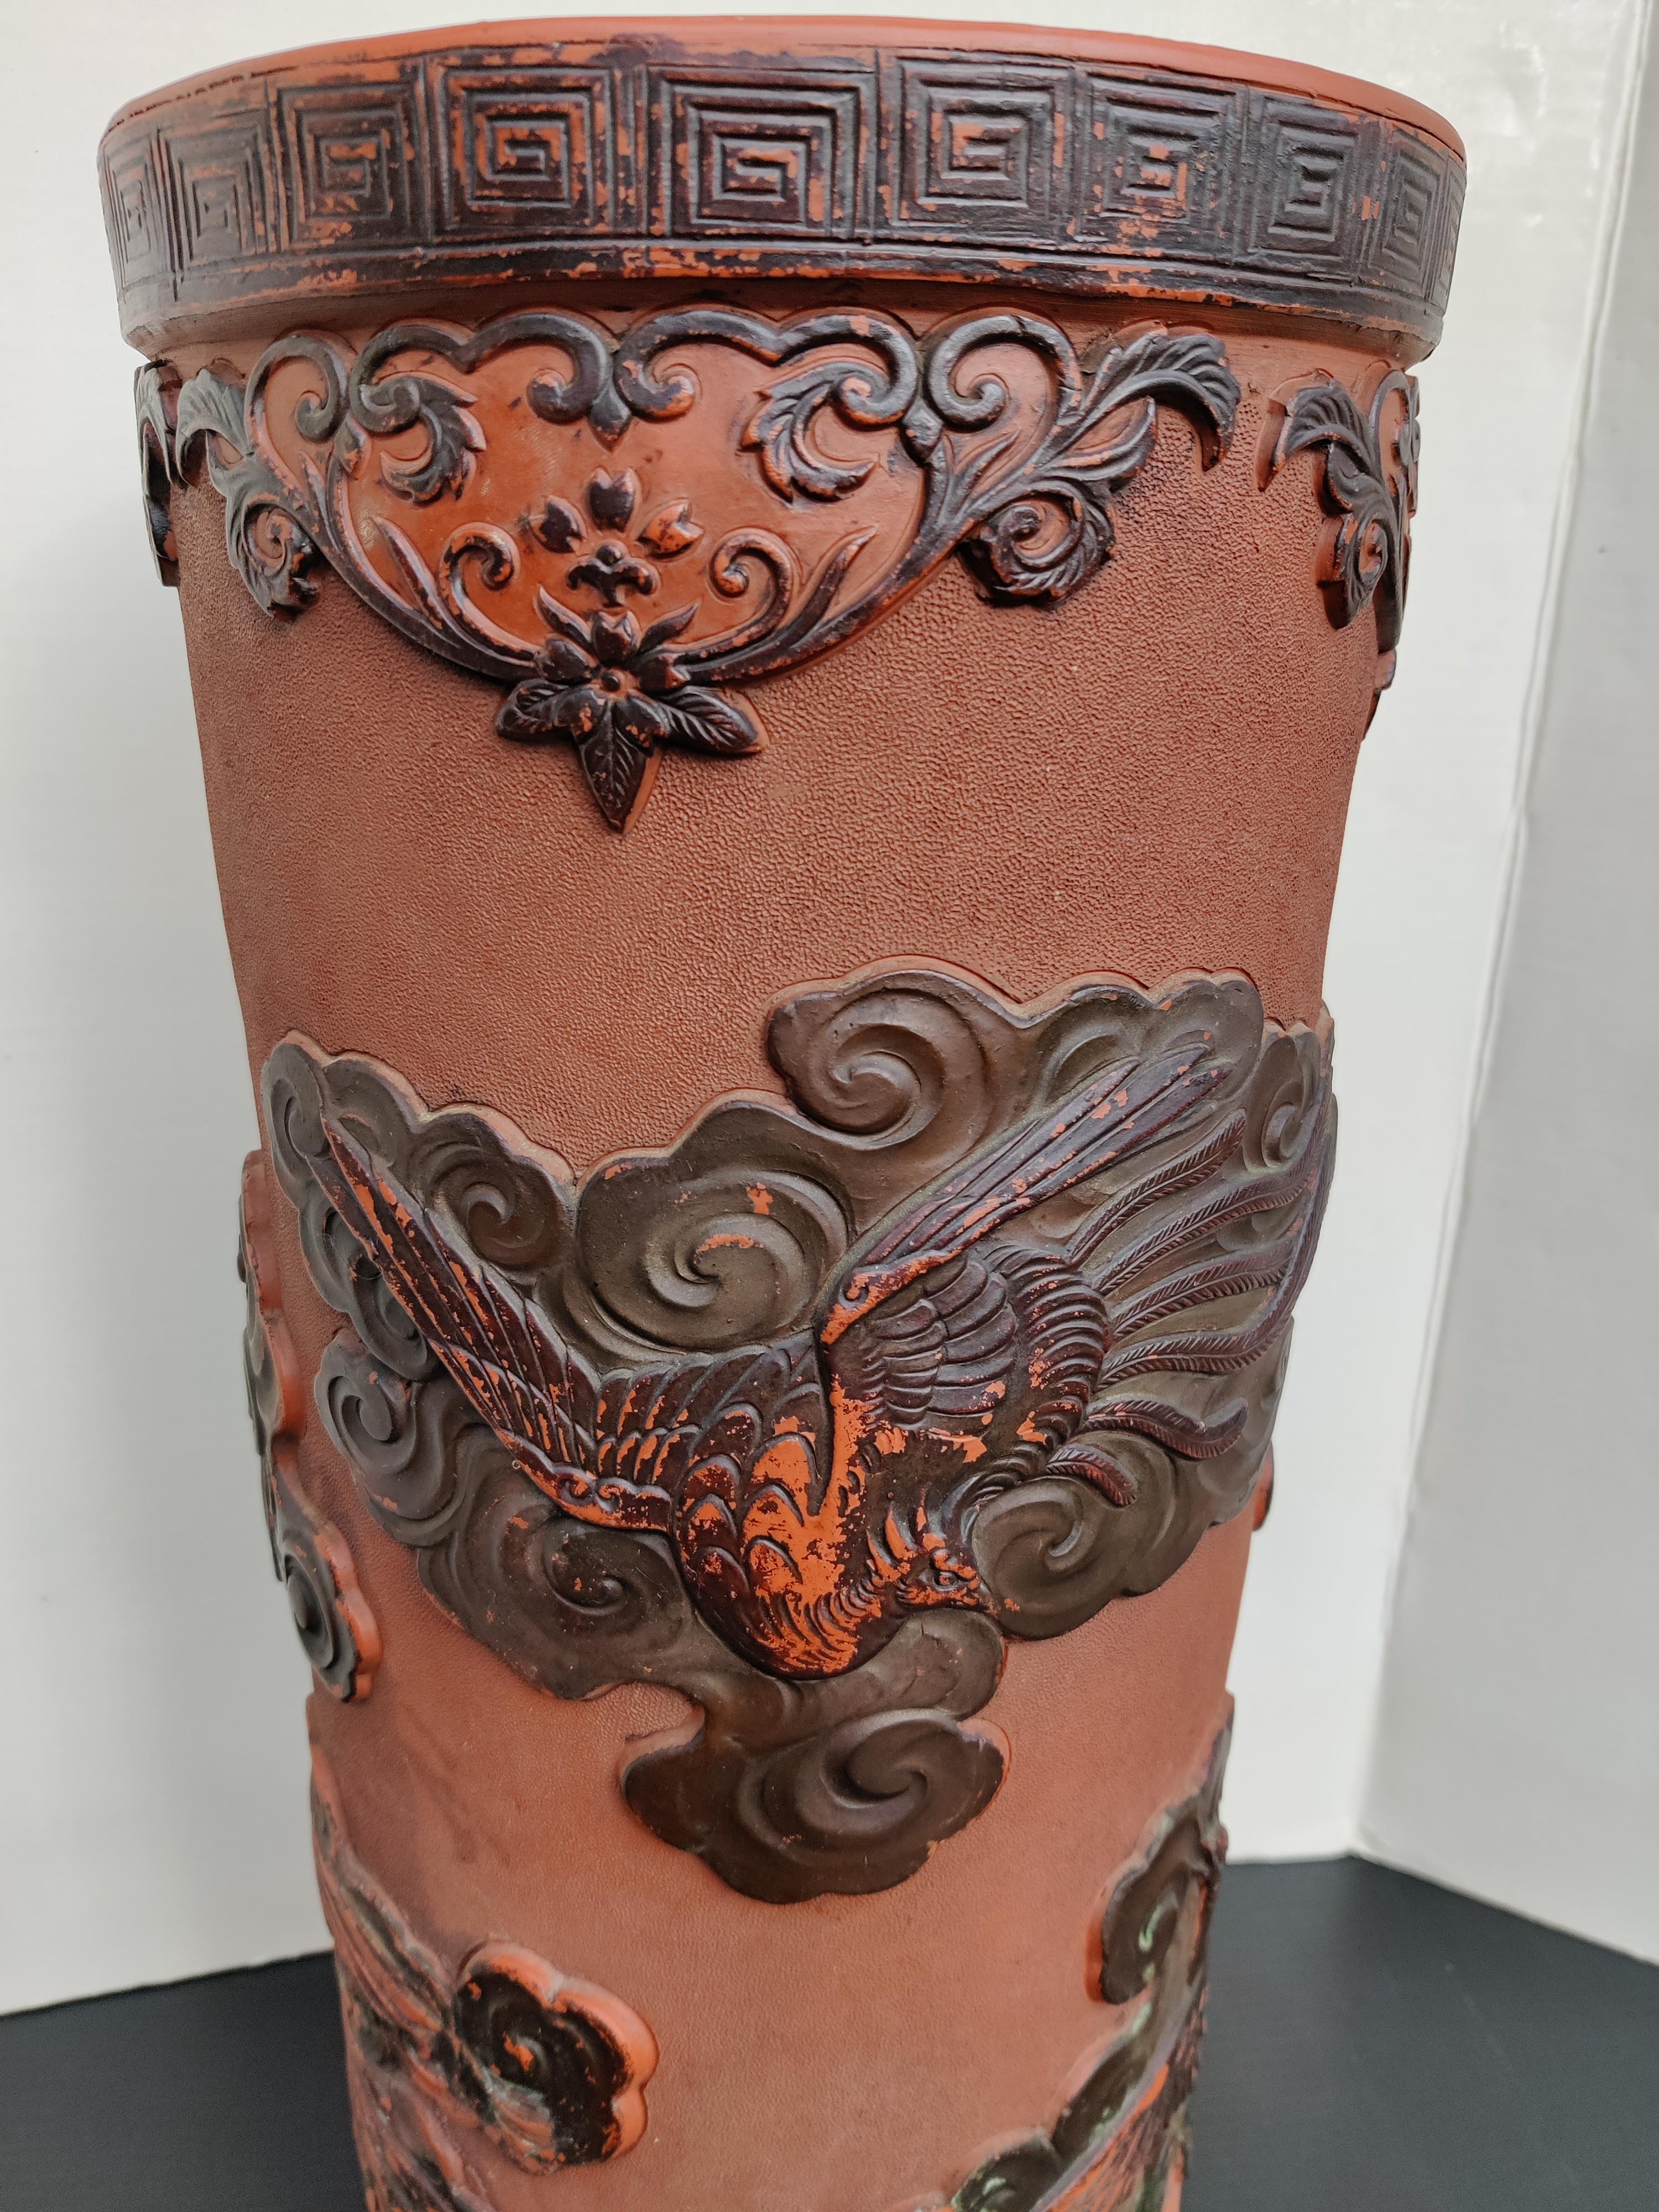 Antique Japanese Terracotta Umbrella Stand with Embossed Birds
No chips.   Some wear.   See pictures.
Marks are on bottom.   See pics. 
